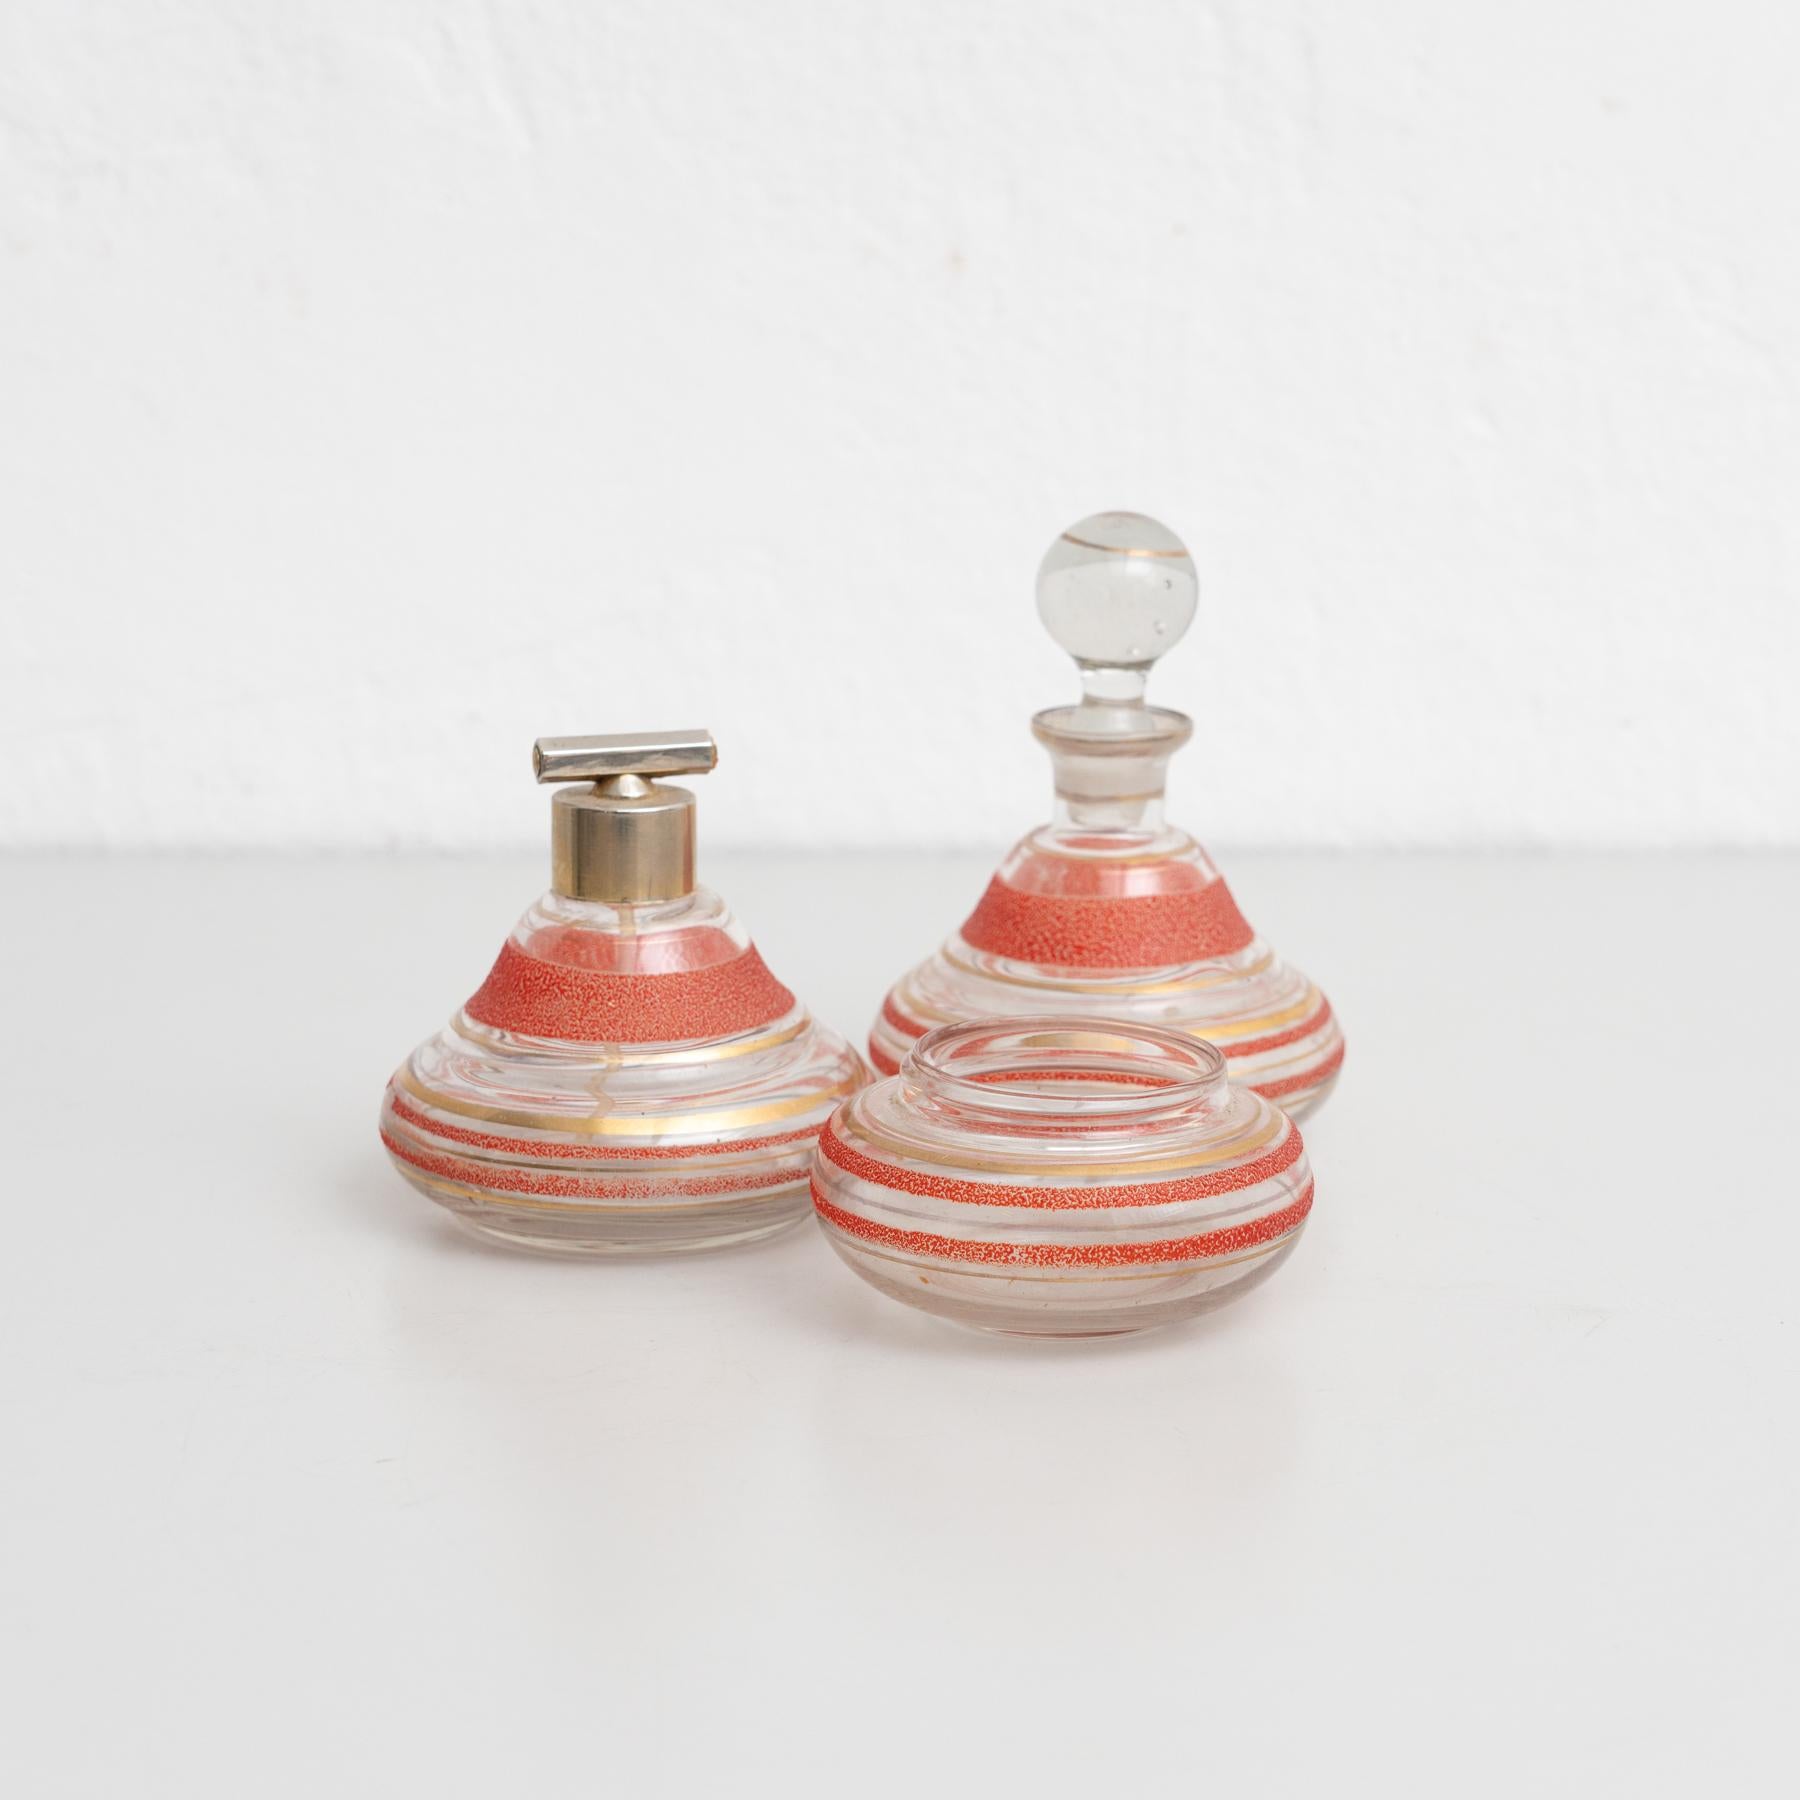 Early 20th century set of three antique apothecary glass bottles.
By unknown manufacturer, Spain.

In original condition, with minor wear consistent with age and use, preserving a beautiful patina.

Materials:
Glass

Dimensions:
Ø 11 cm x H